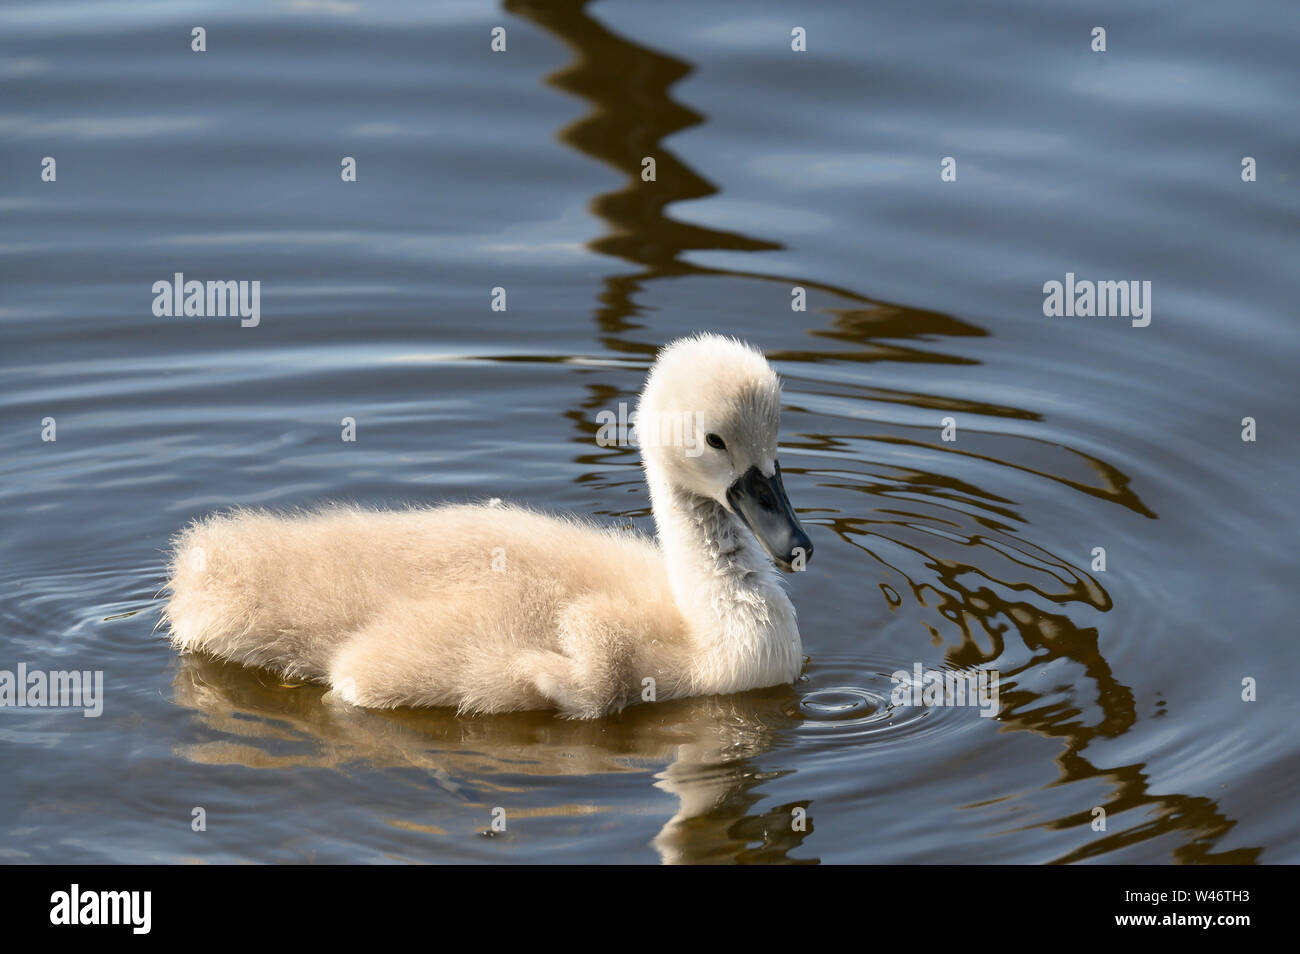 A Cygnet or better refered to as a young swan swimming around Stock Photo